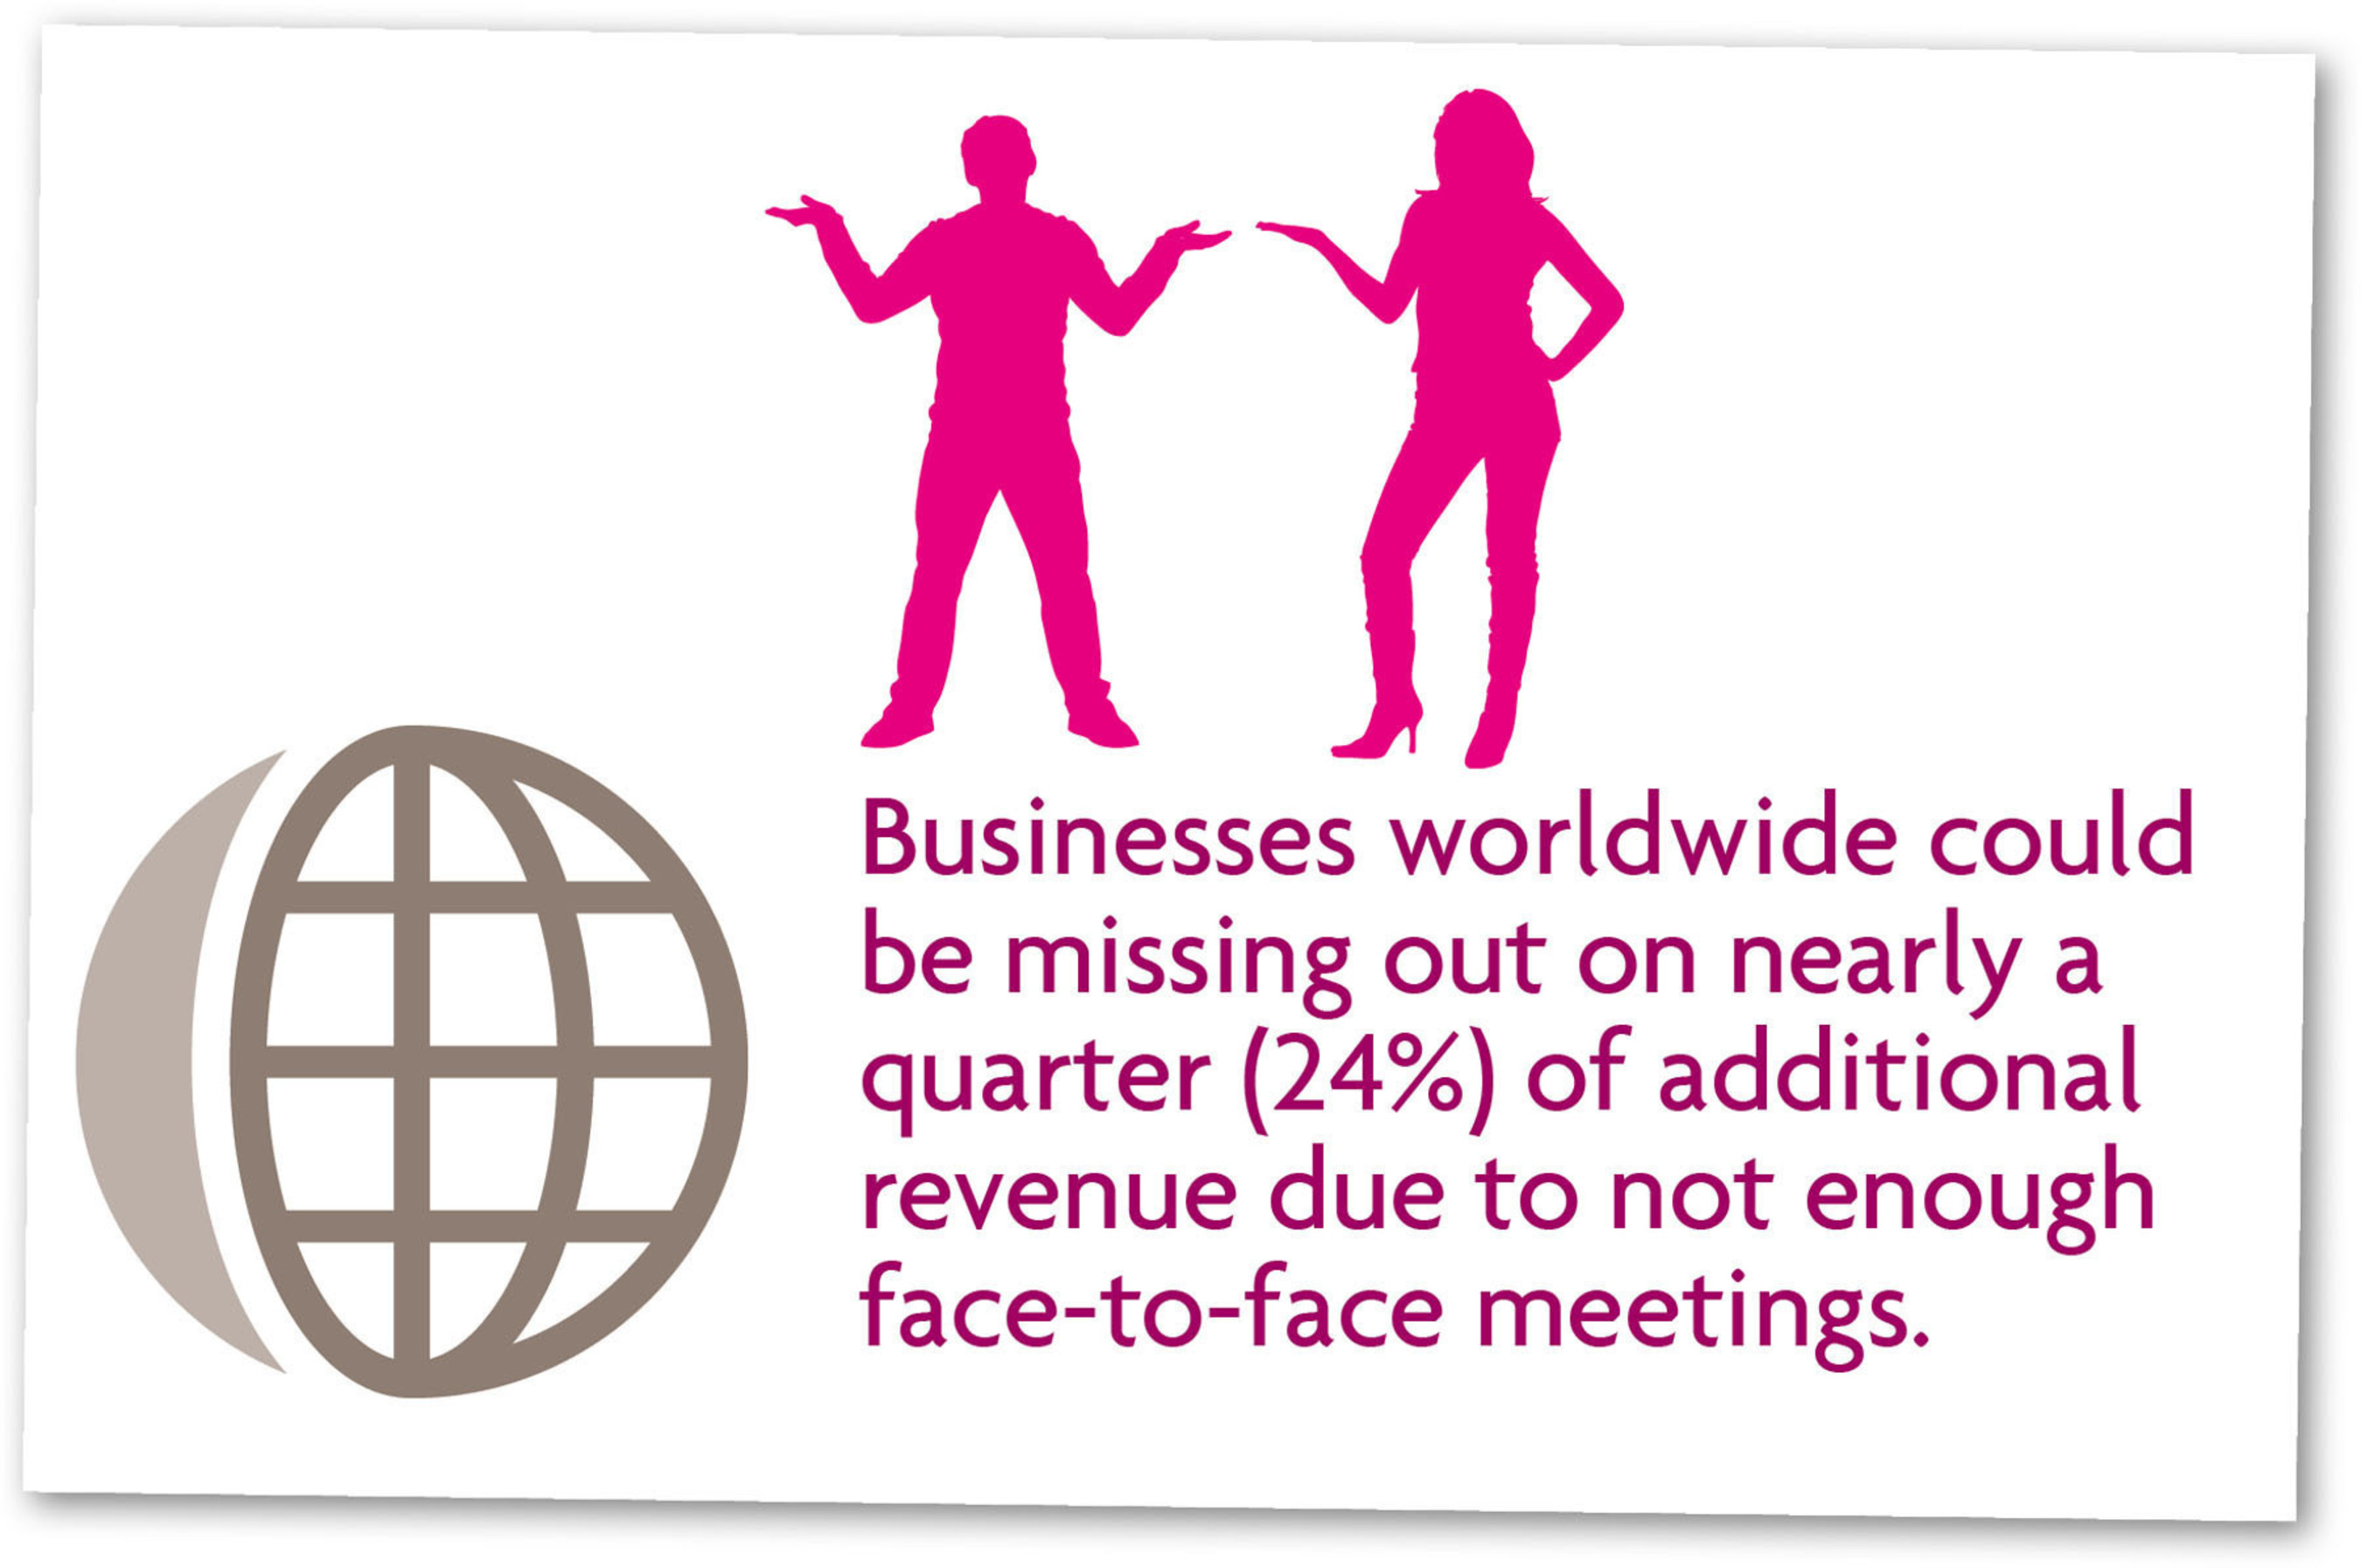 Business Meetings in a Modern World Infographic. (PRNewsFoto/Crowne Plaza(R) Hotels & Resorts) (PRNewsFoto/CROWNE PLAZA(R) HOTELS & RESORTS)